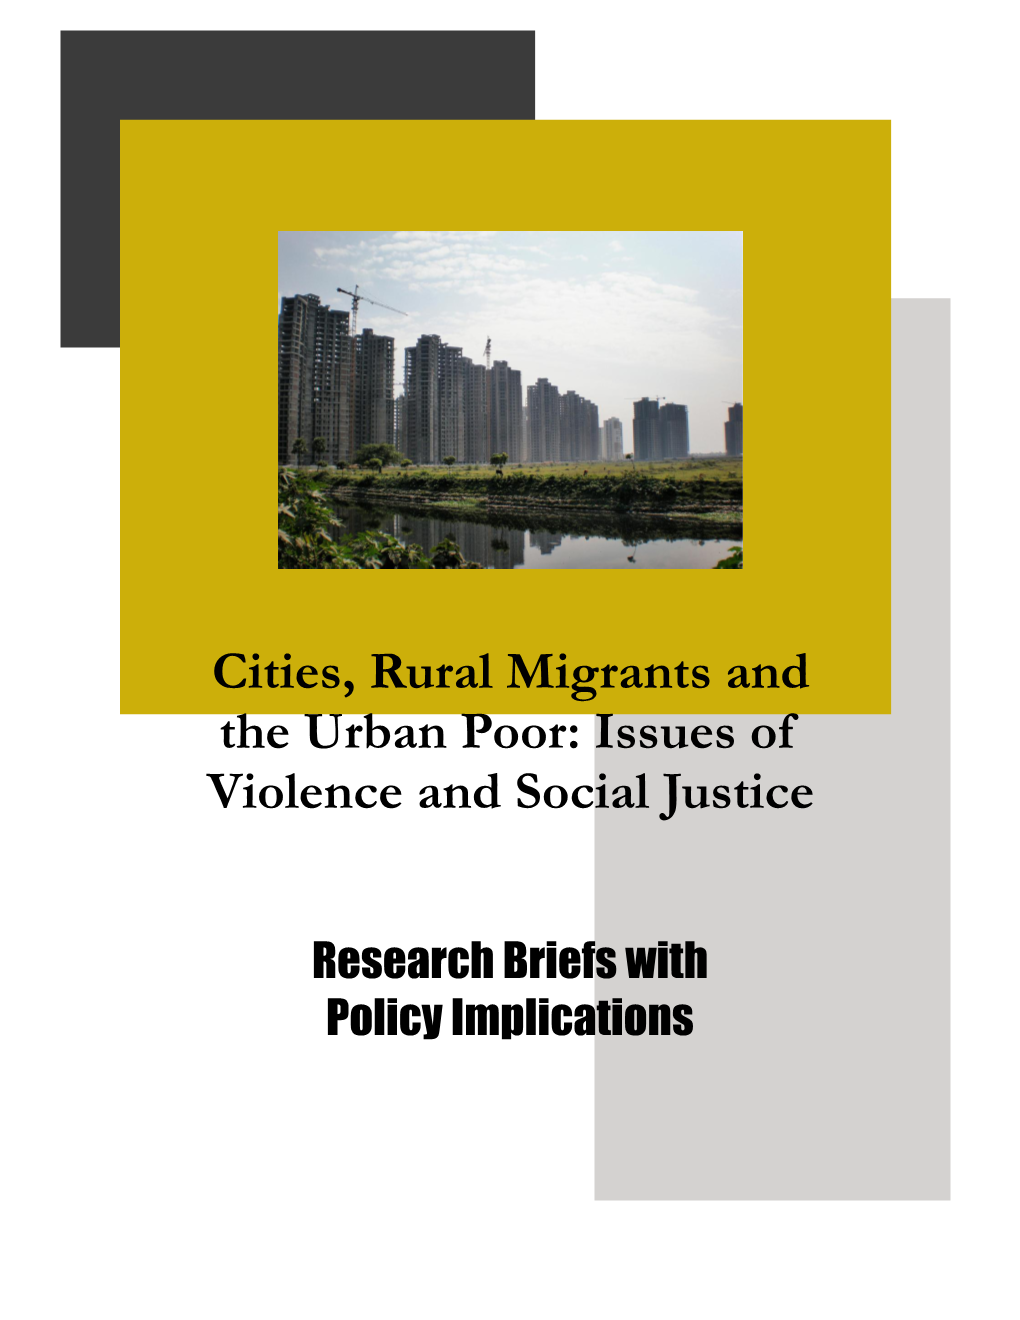 Cities, Rural Migrants and the Urban Poor: Issues of Violence and Social Justice